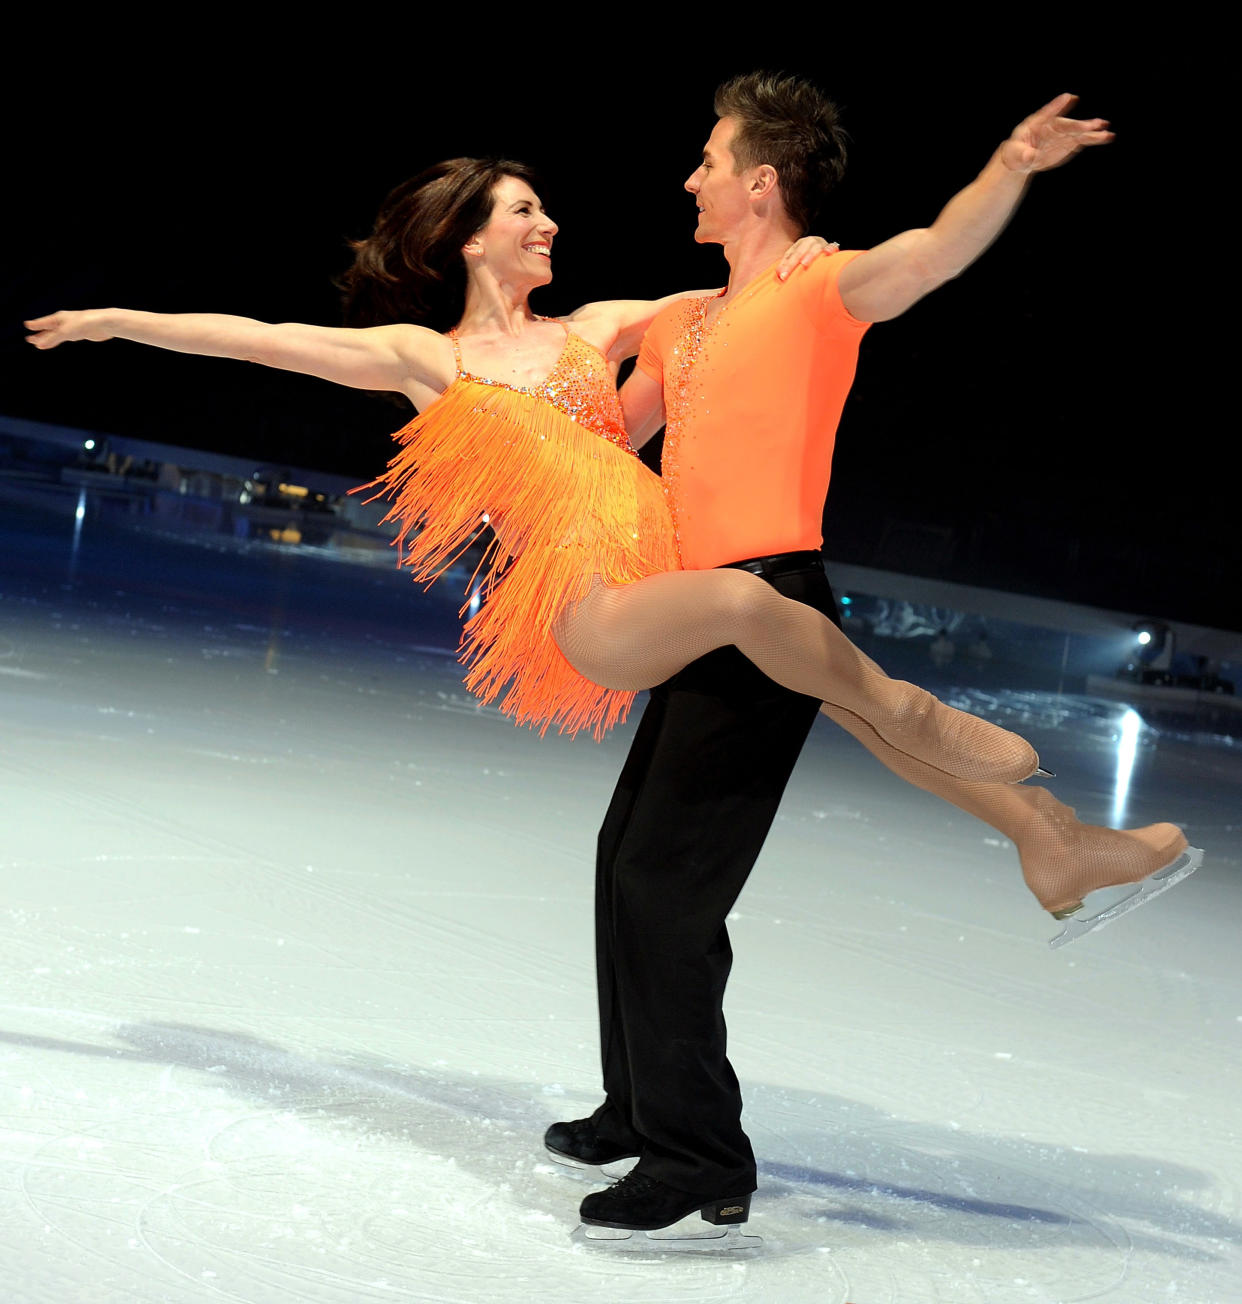 Gaynor Faye and  Matt Evers attend a photocall for Torvill & Dean's 'Dancing On Ice' tour 2010 at MEN Arena on April 22, 2010 in Manchester, England.  (Photo by Shirlaine Forrest/WireImage)